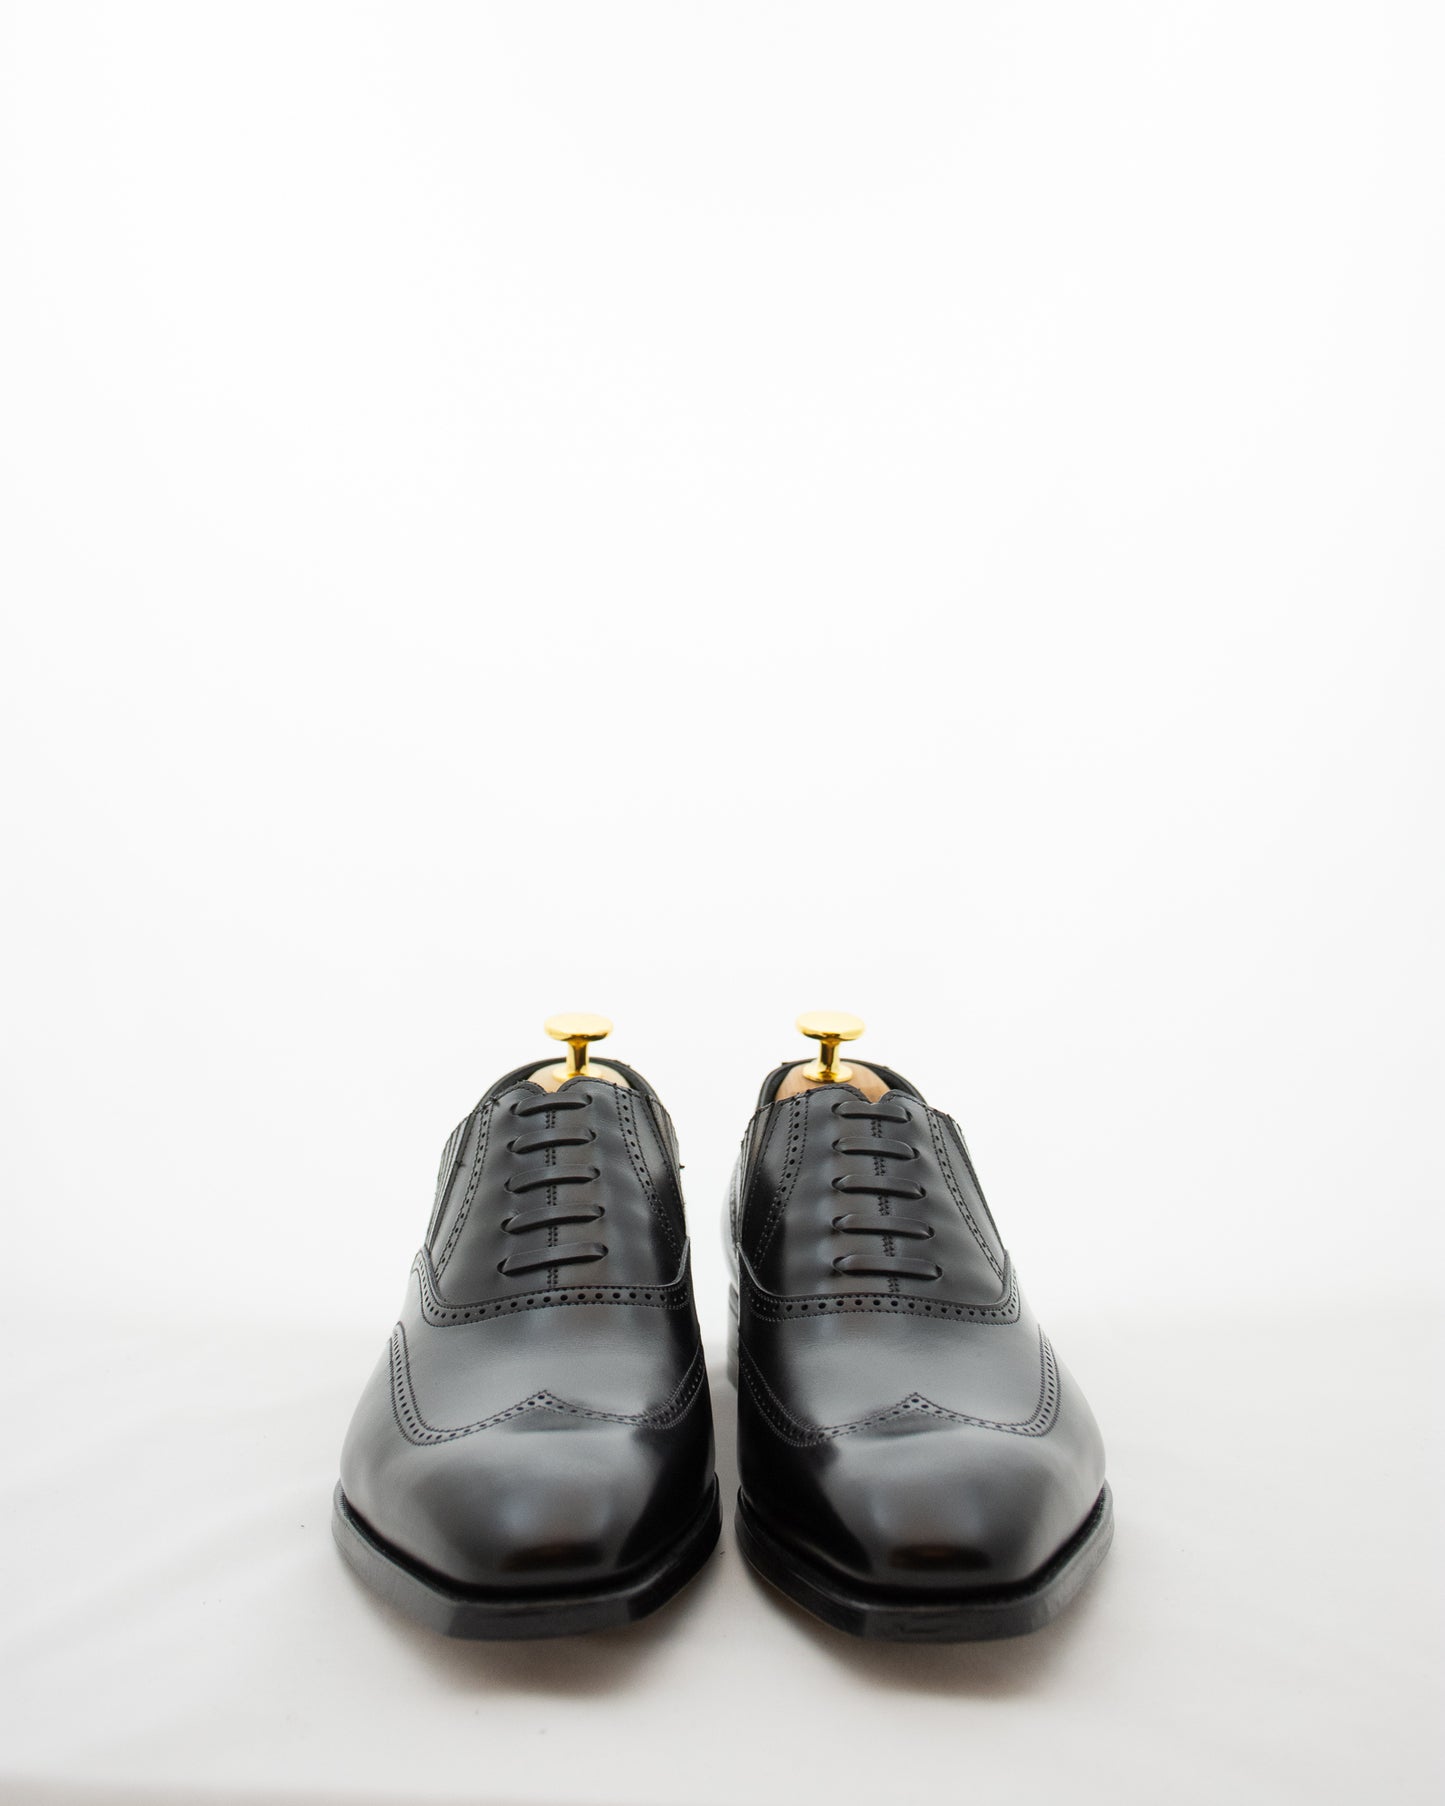 GEORGE CLEVERLEY Winston Oxford Brogue